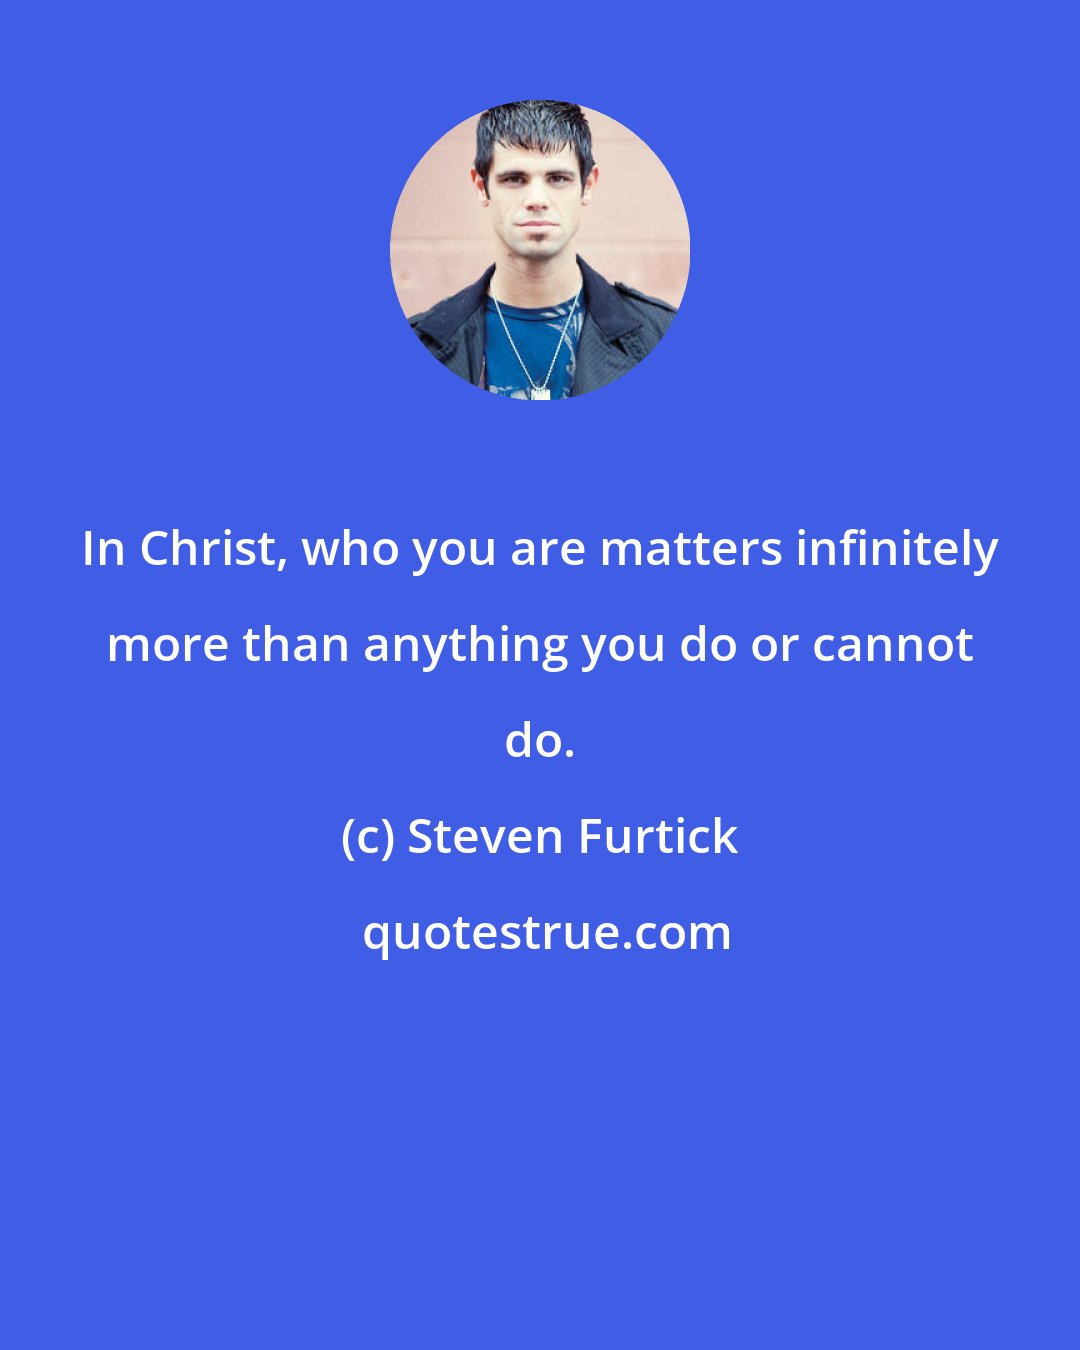 Steven Furtick: In Christ, who you are matters infinitely more than anything you do or cannot do.